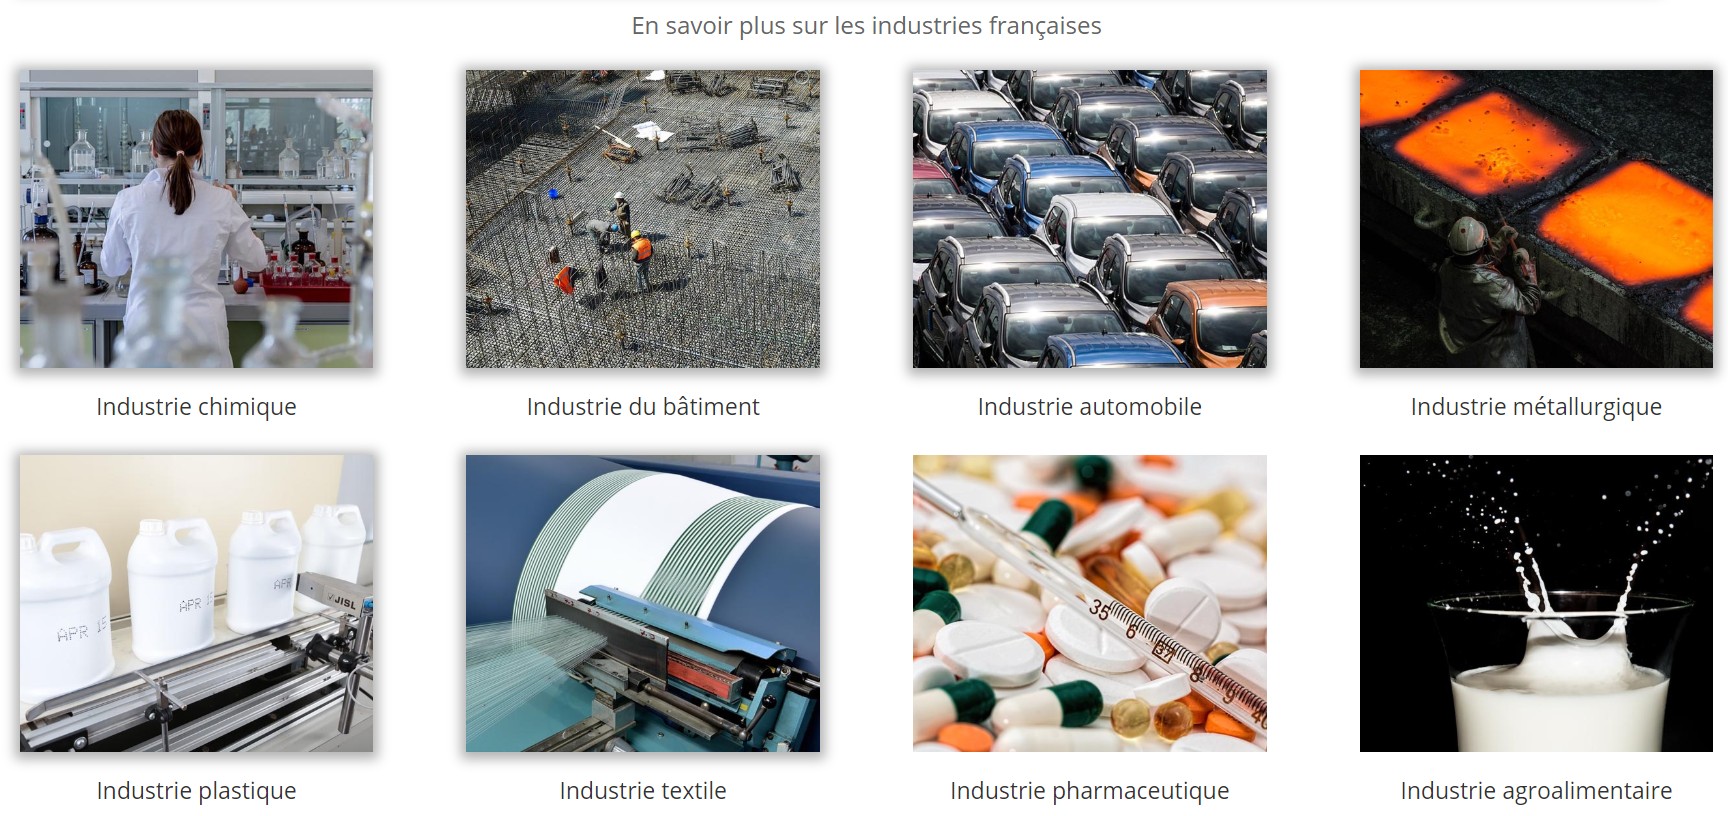 France Industrie